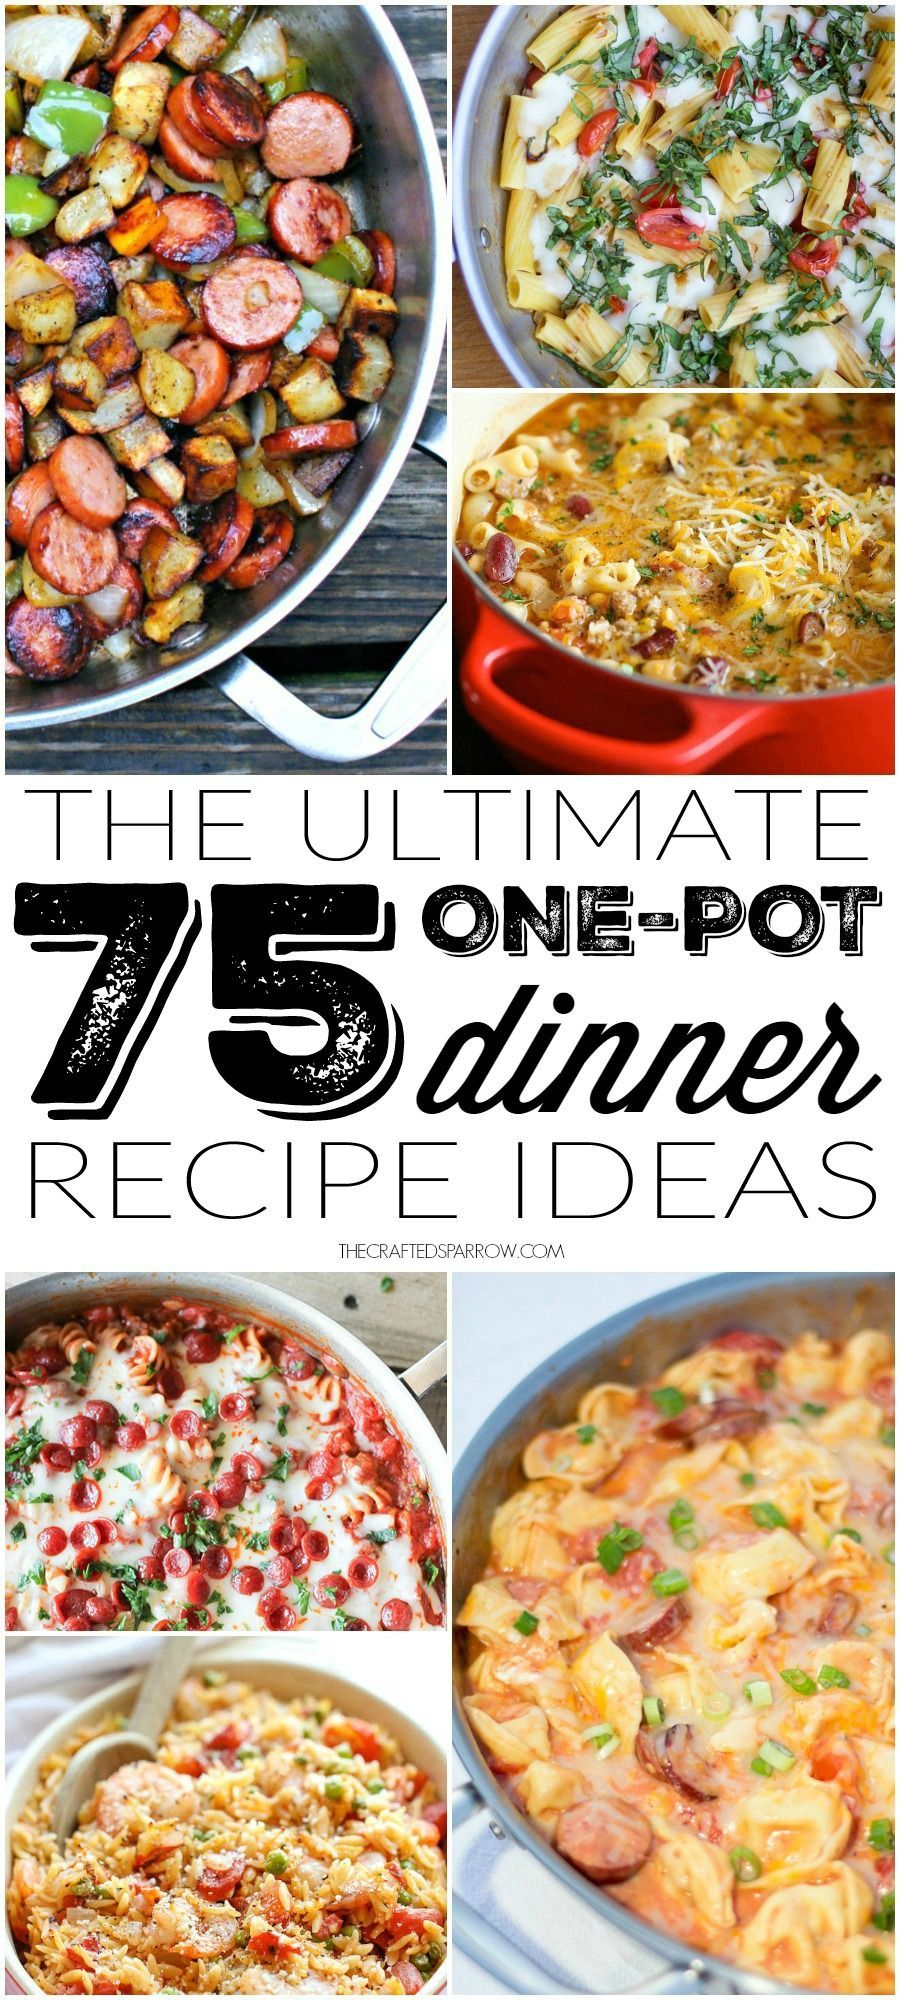 Make meal planning and dinner clean-up a breeze with one of these great 75 One-Pot Dinner Recipe Ideas. So many delicious recipes